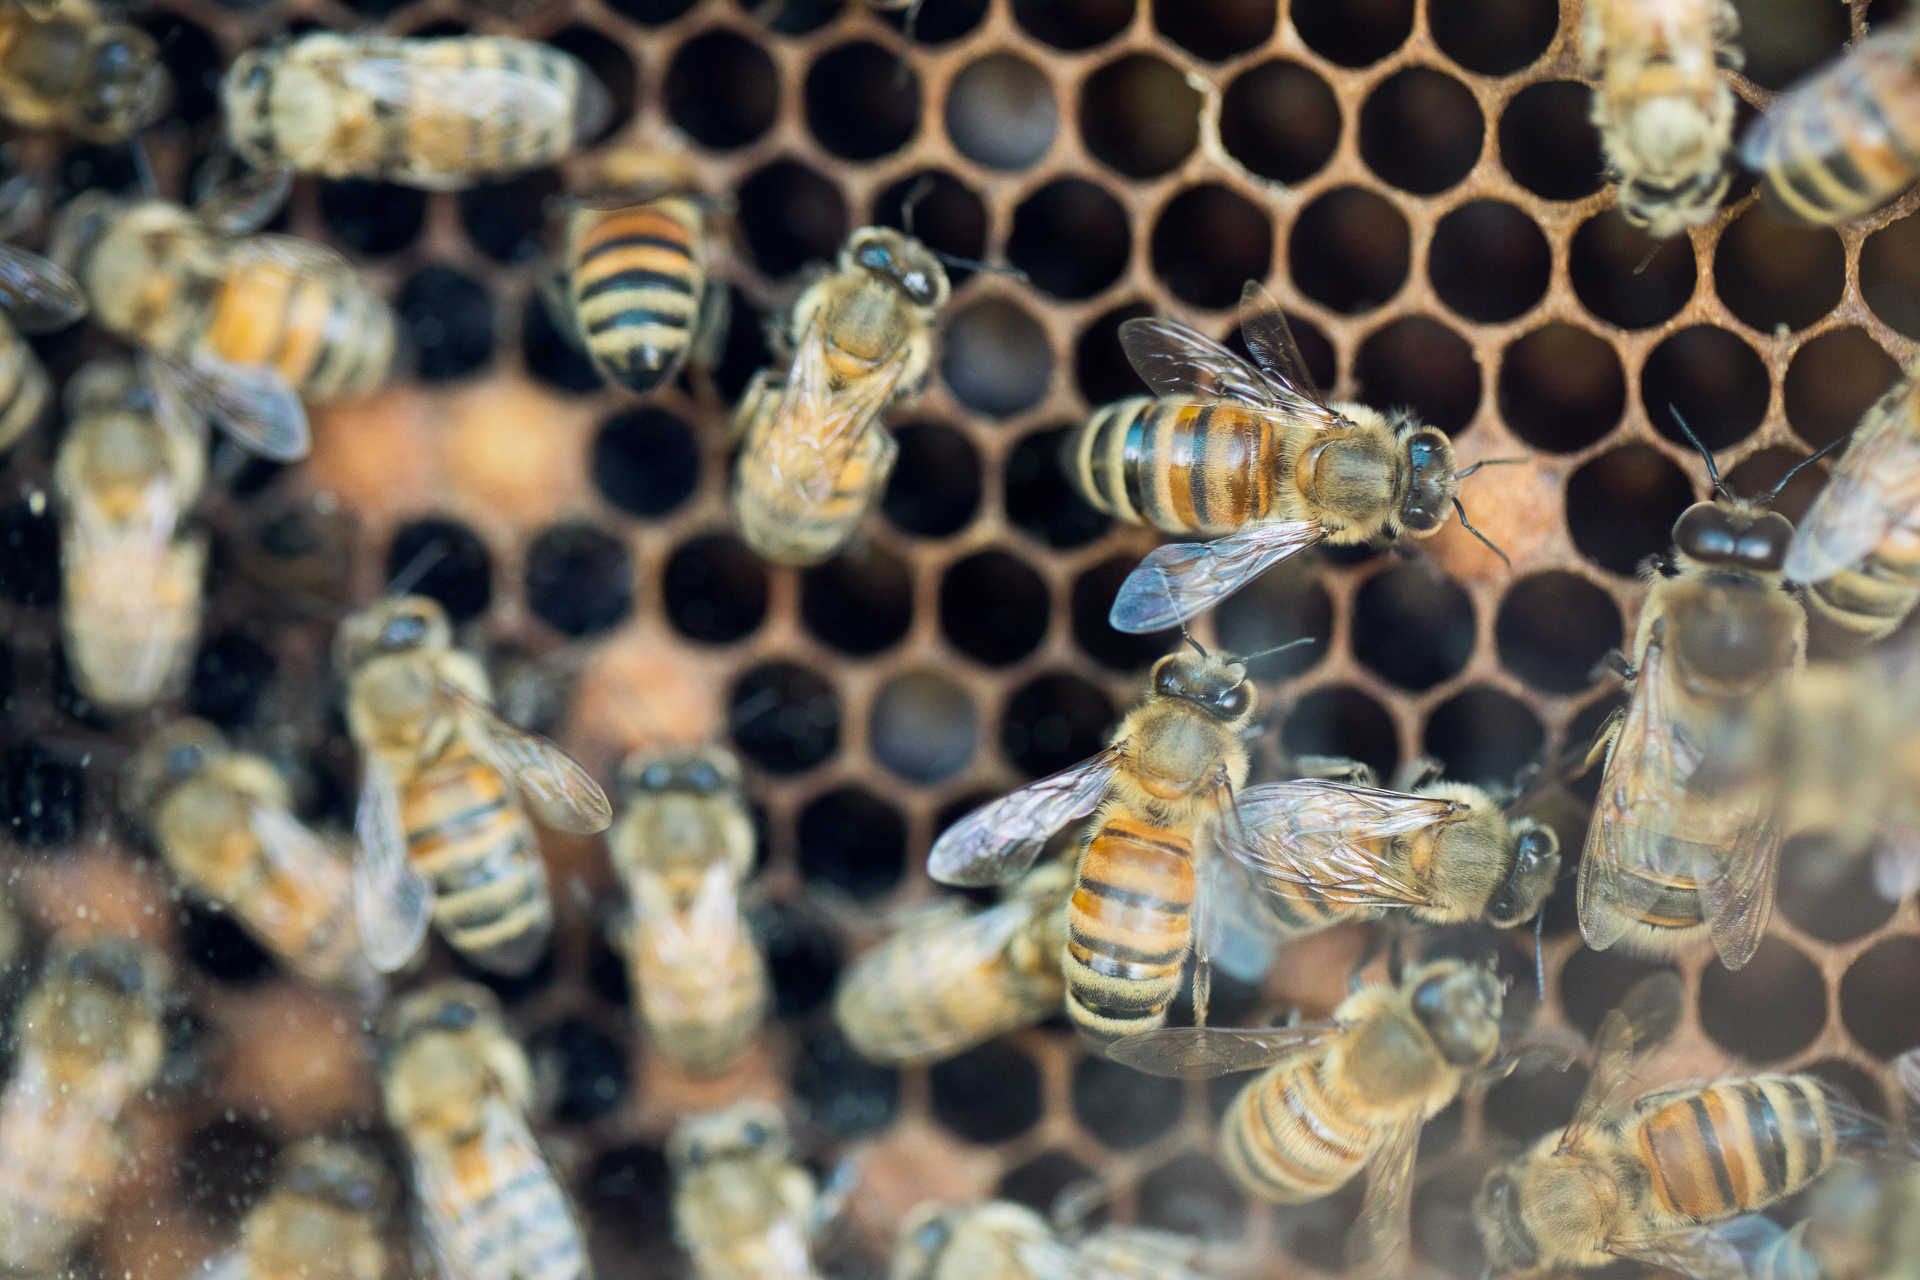 Image of bees